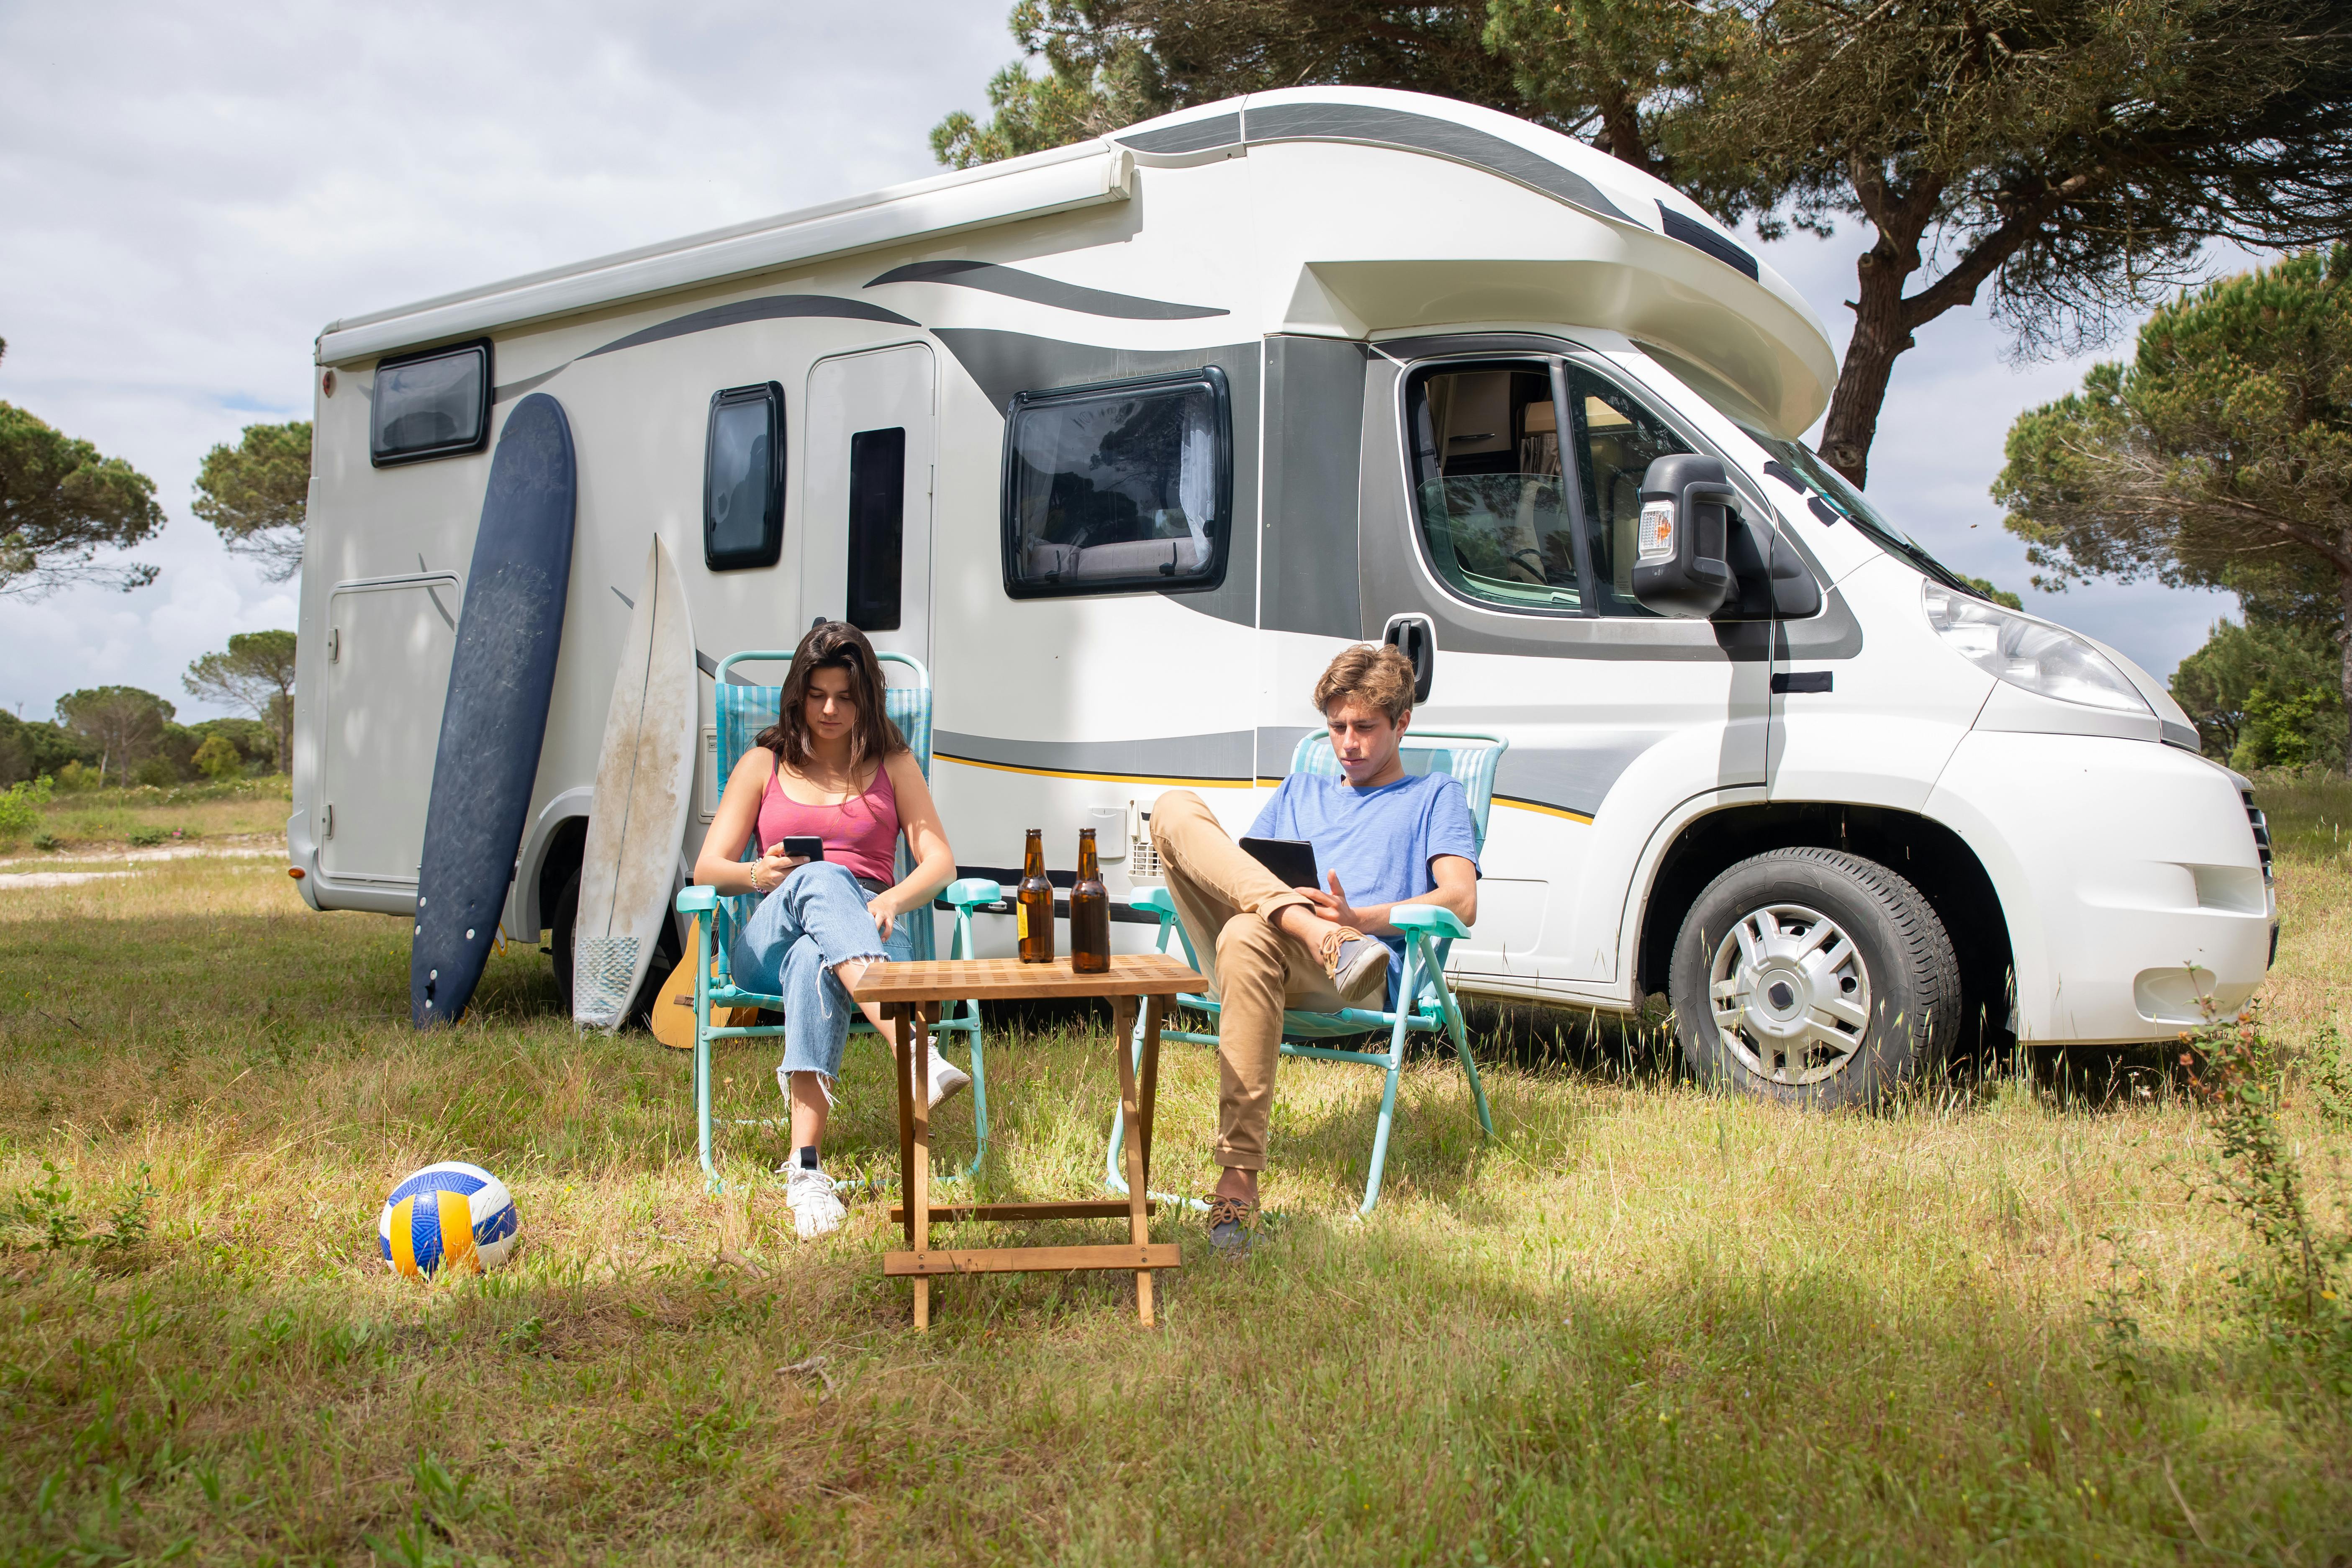 What You Should Know Before Buying a Camper Trailer